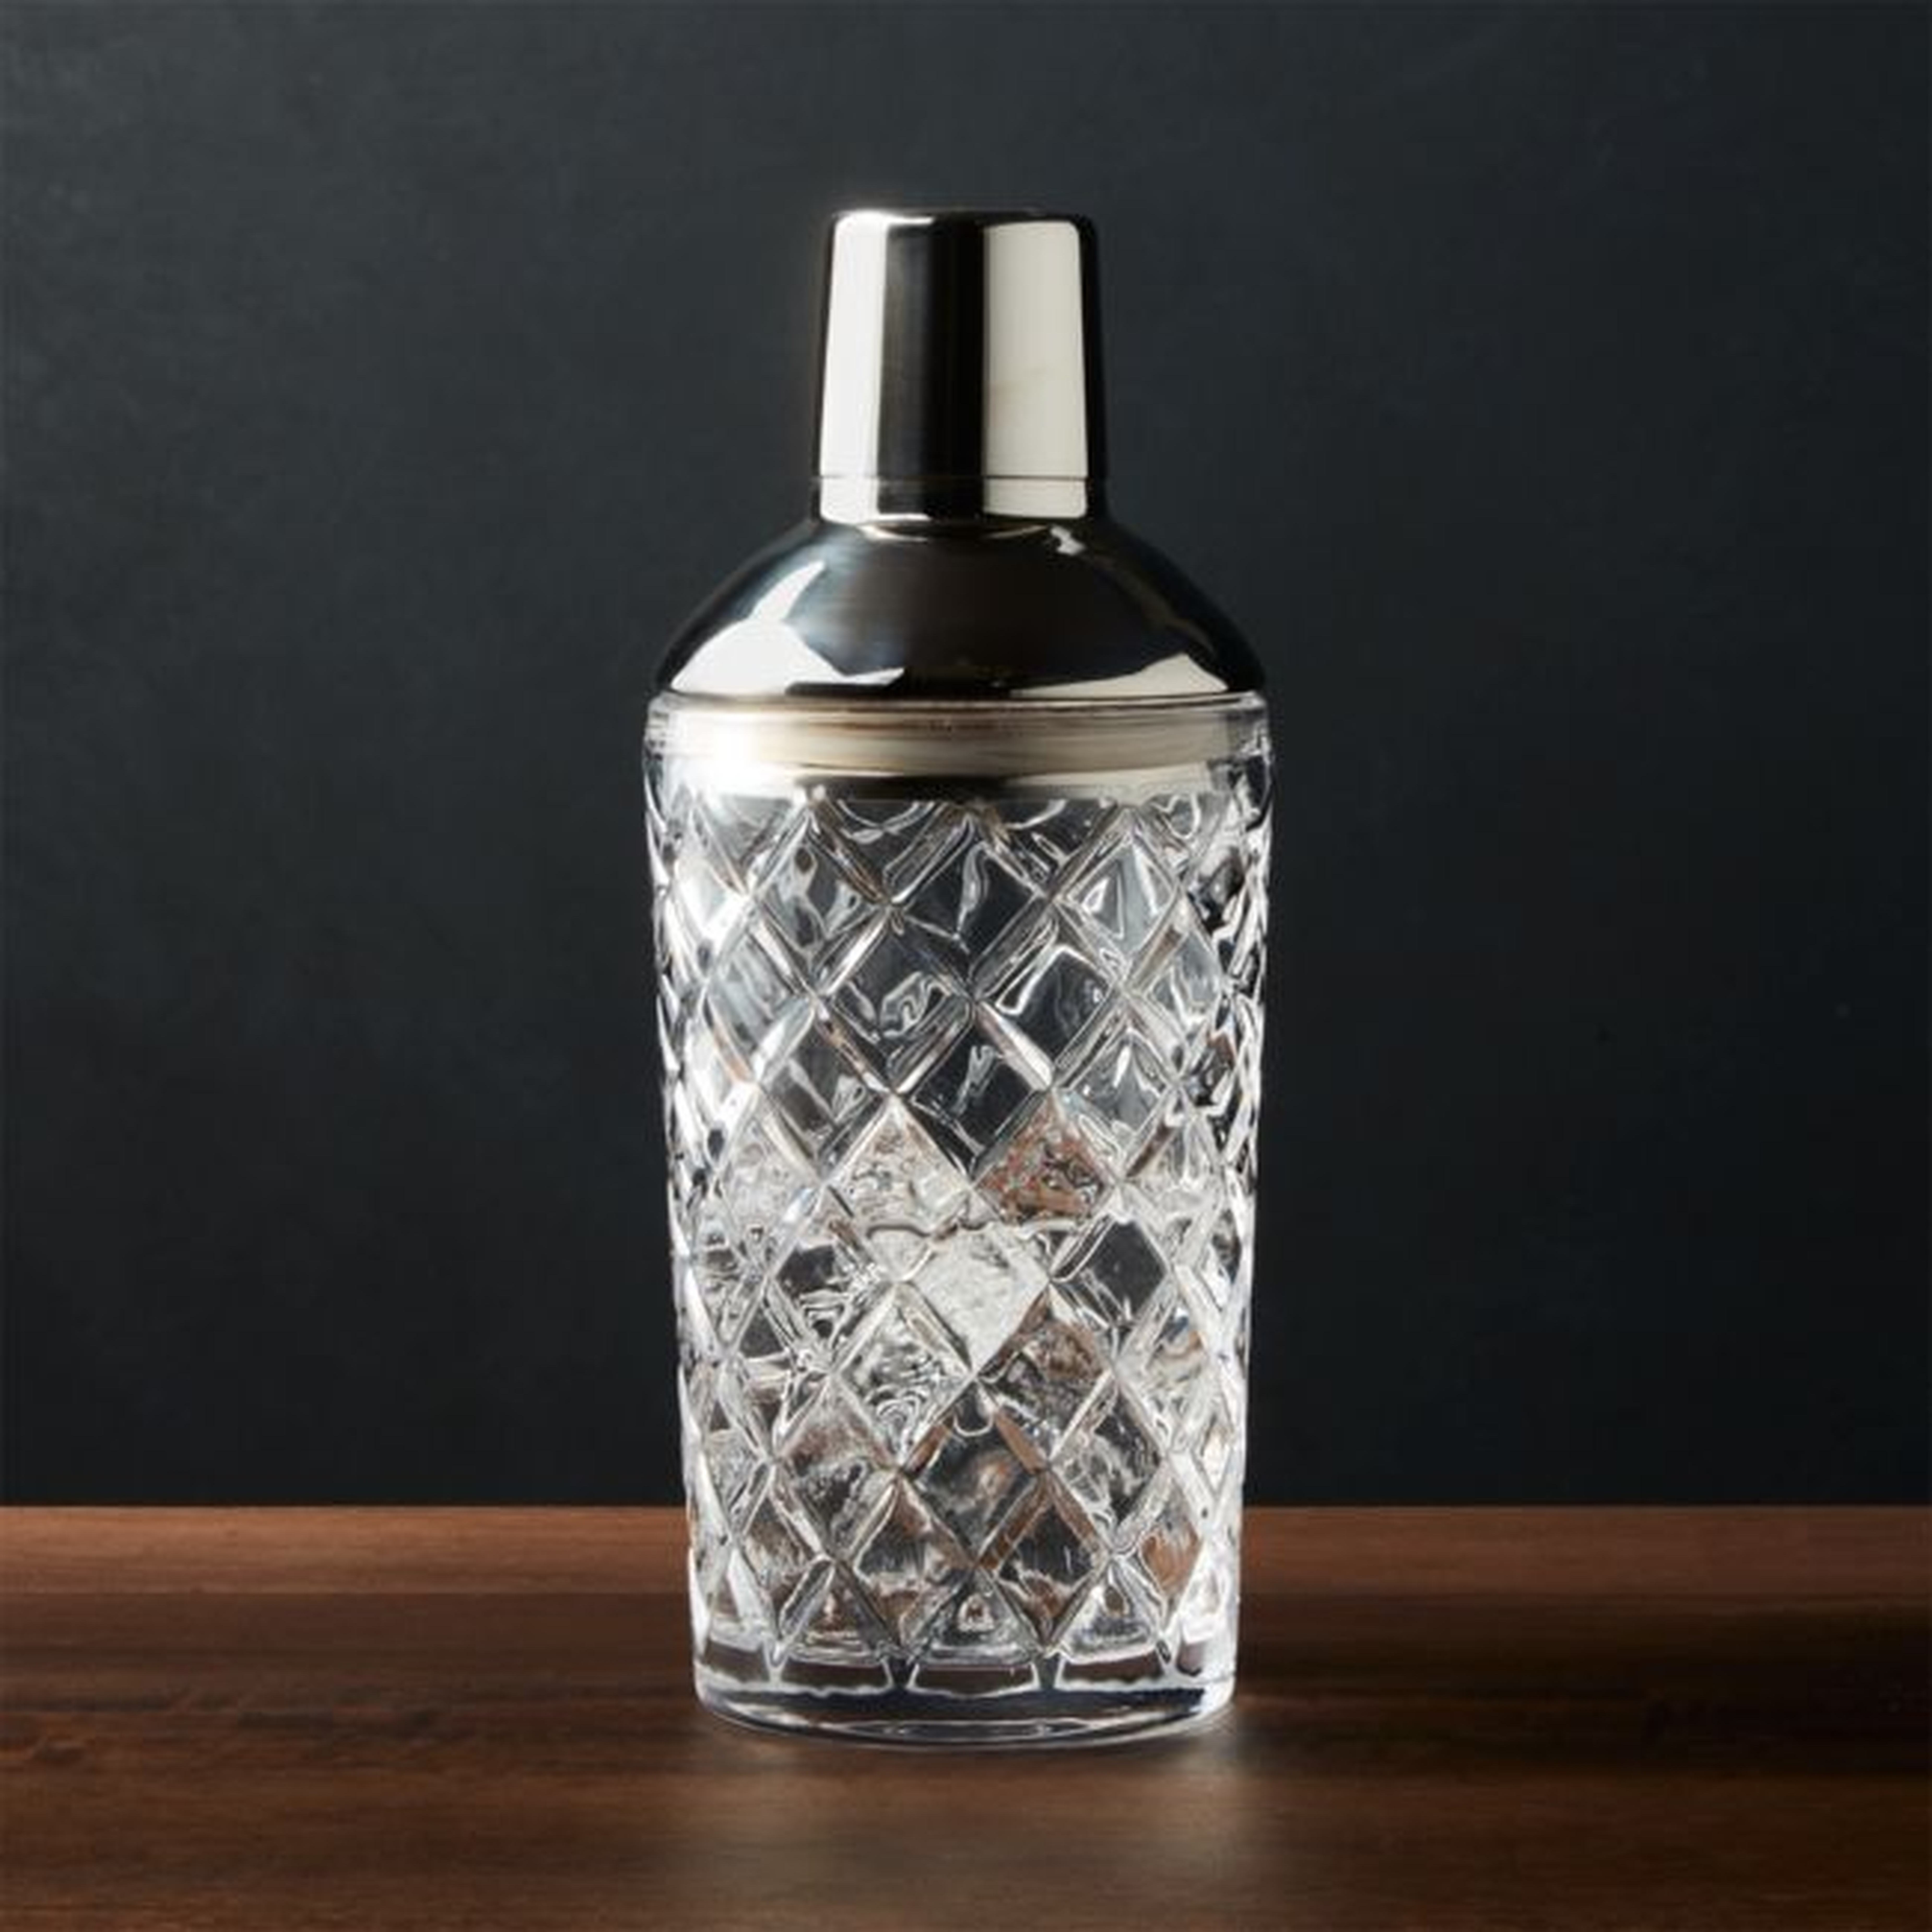 Hatch Cocktail Shaker - Crate and Barrel